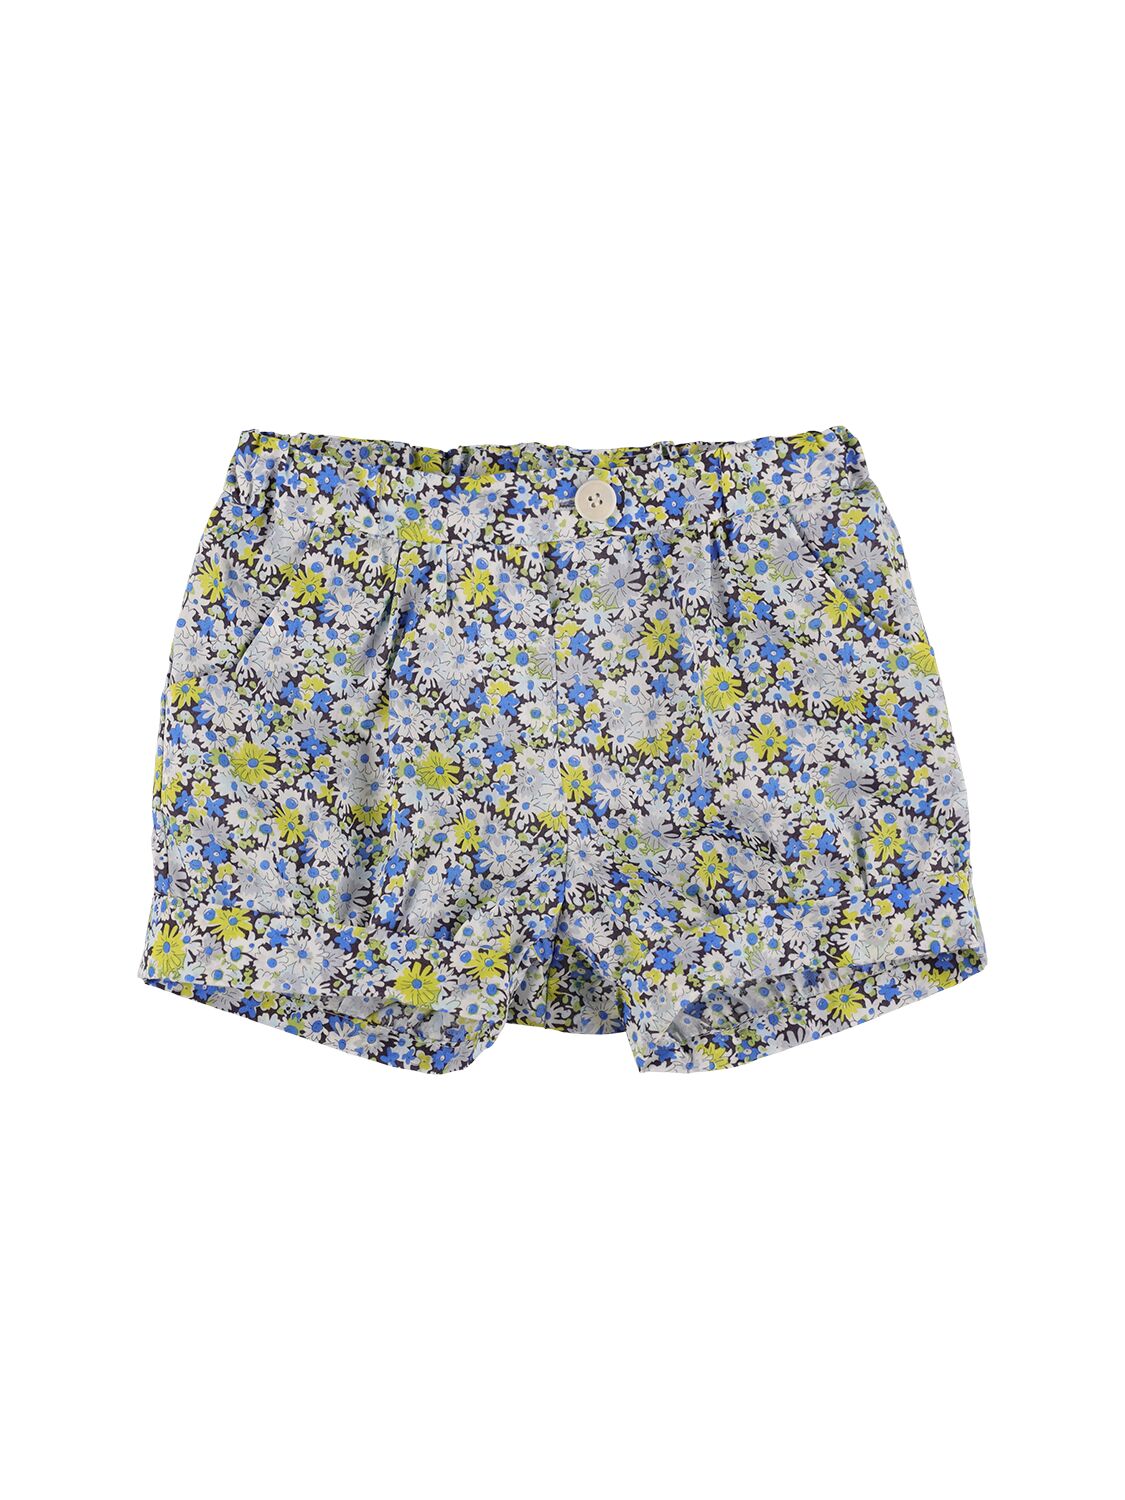 Bonpoint Kids' Printed Cotton Shorts In Blue